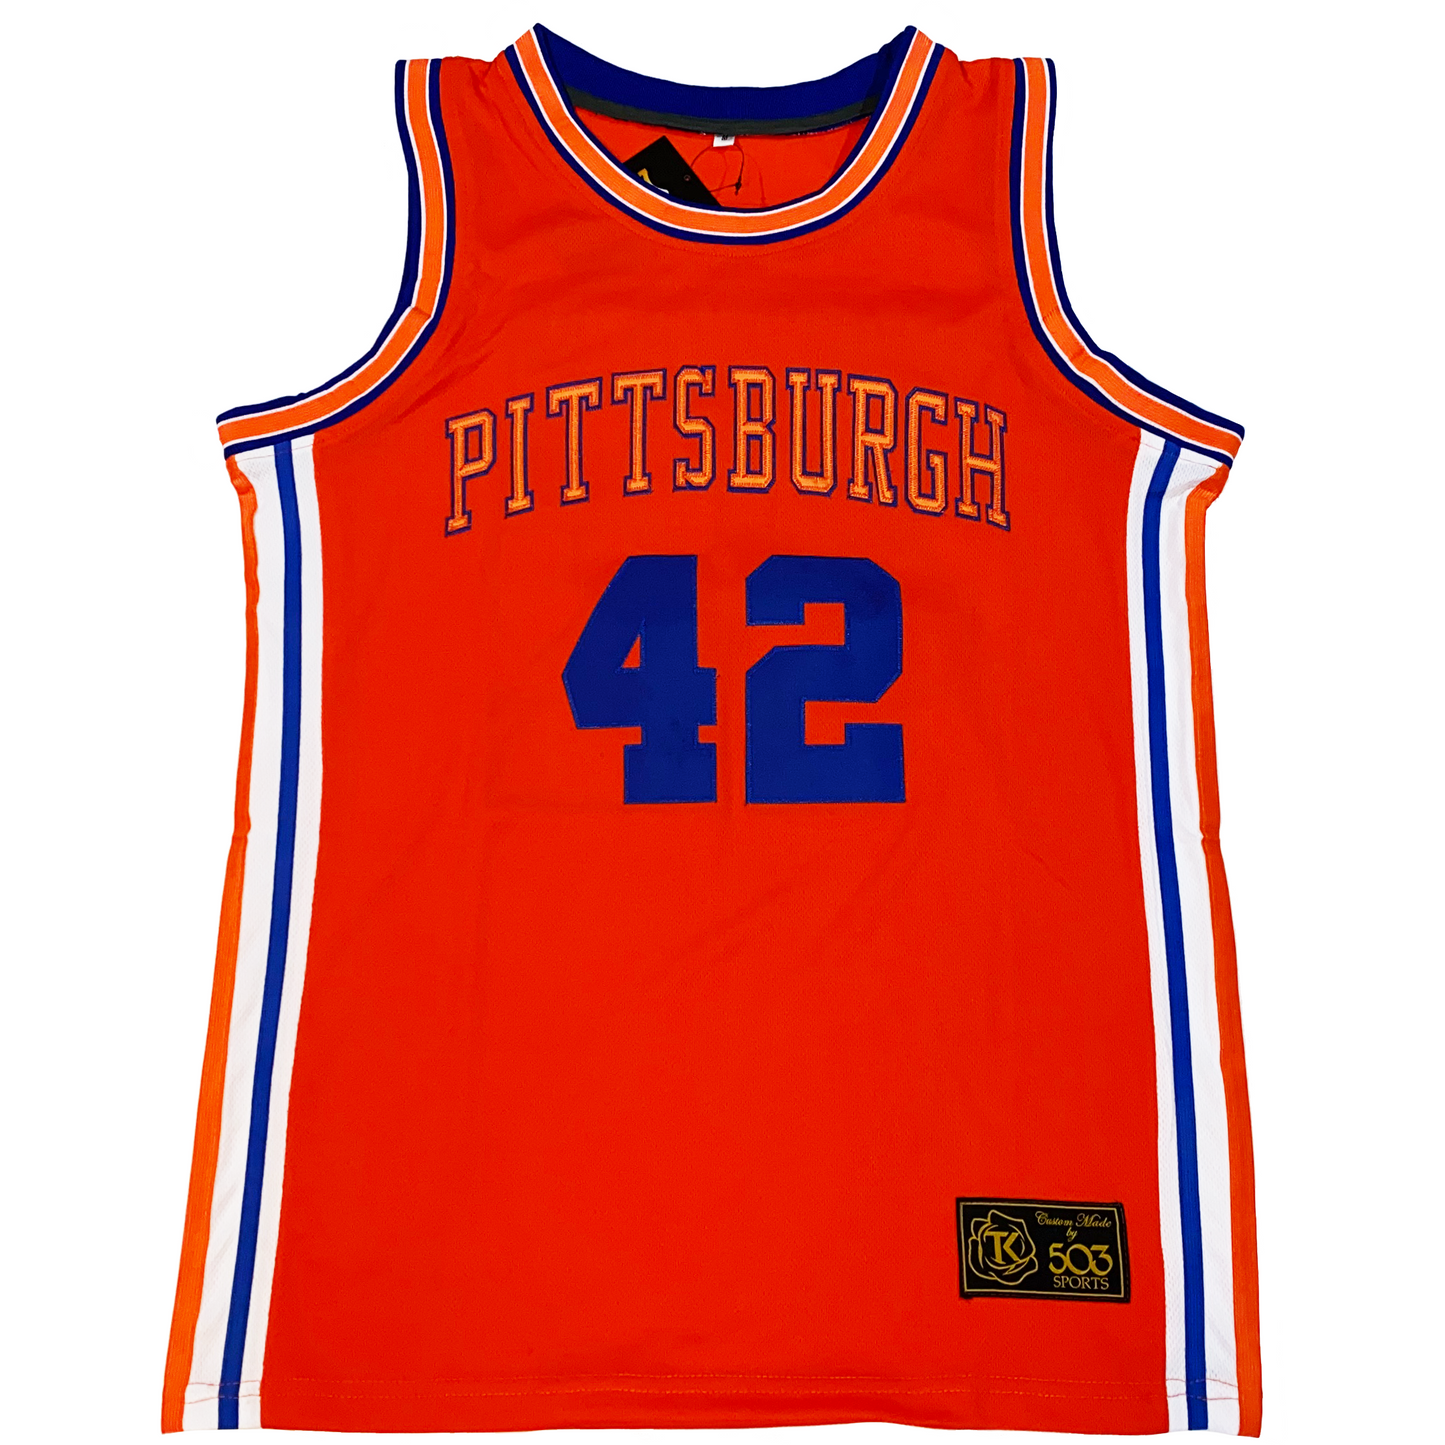 Pittsburgh Pipers Jersey